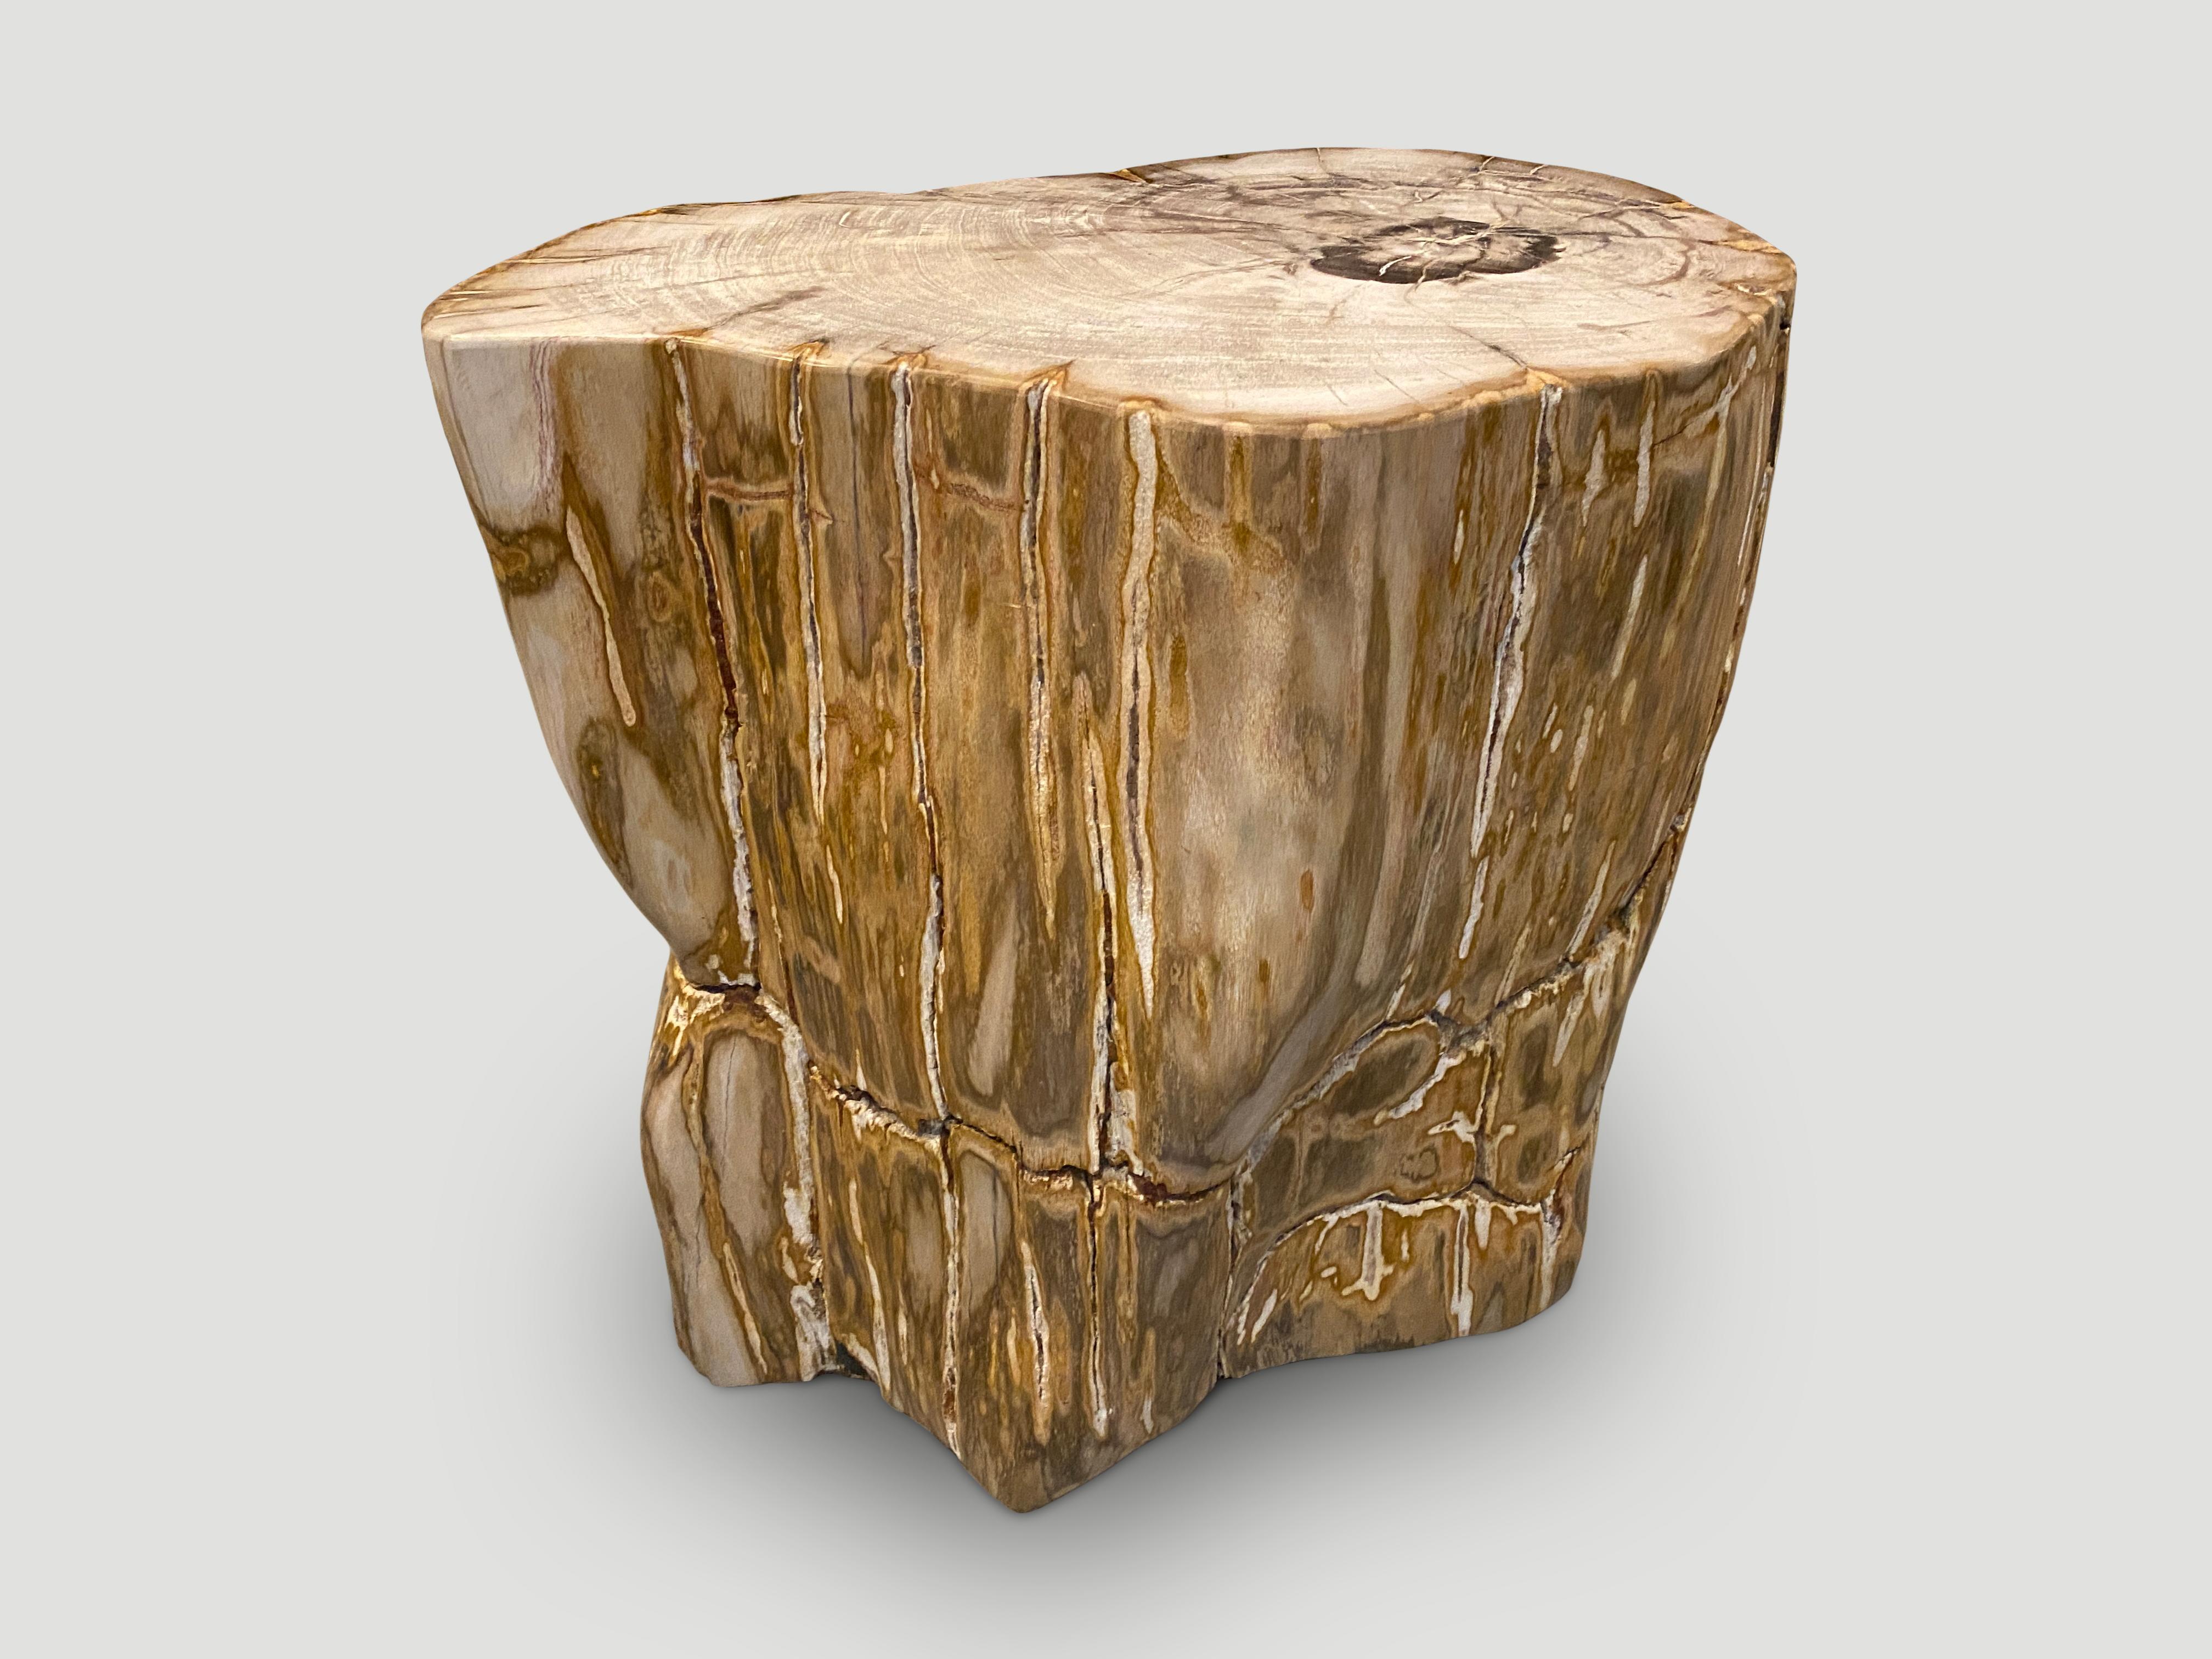 mpressive beautiful contrasting tones and textures on this ancient petrified wood side table. It’s fascinating how Mother Nature produces these exquisite 40 million year old petrified teak logs with such contrasting colors and natural patterns